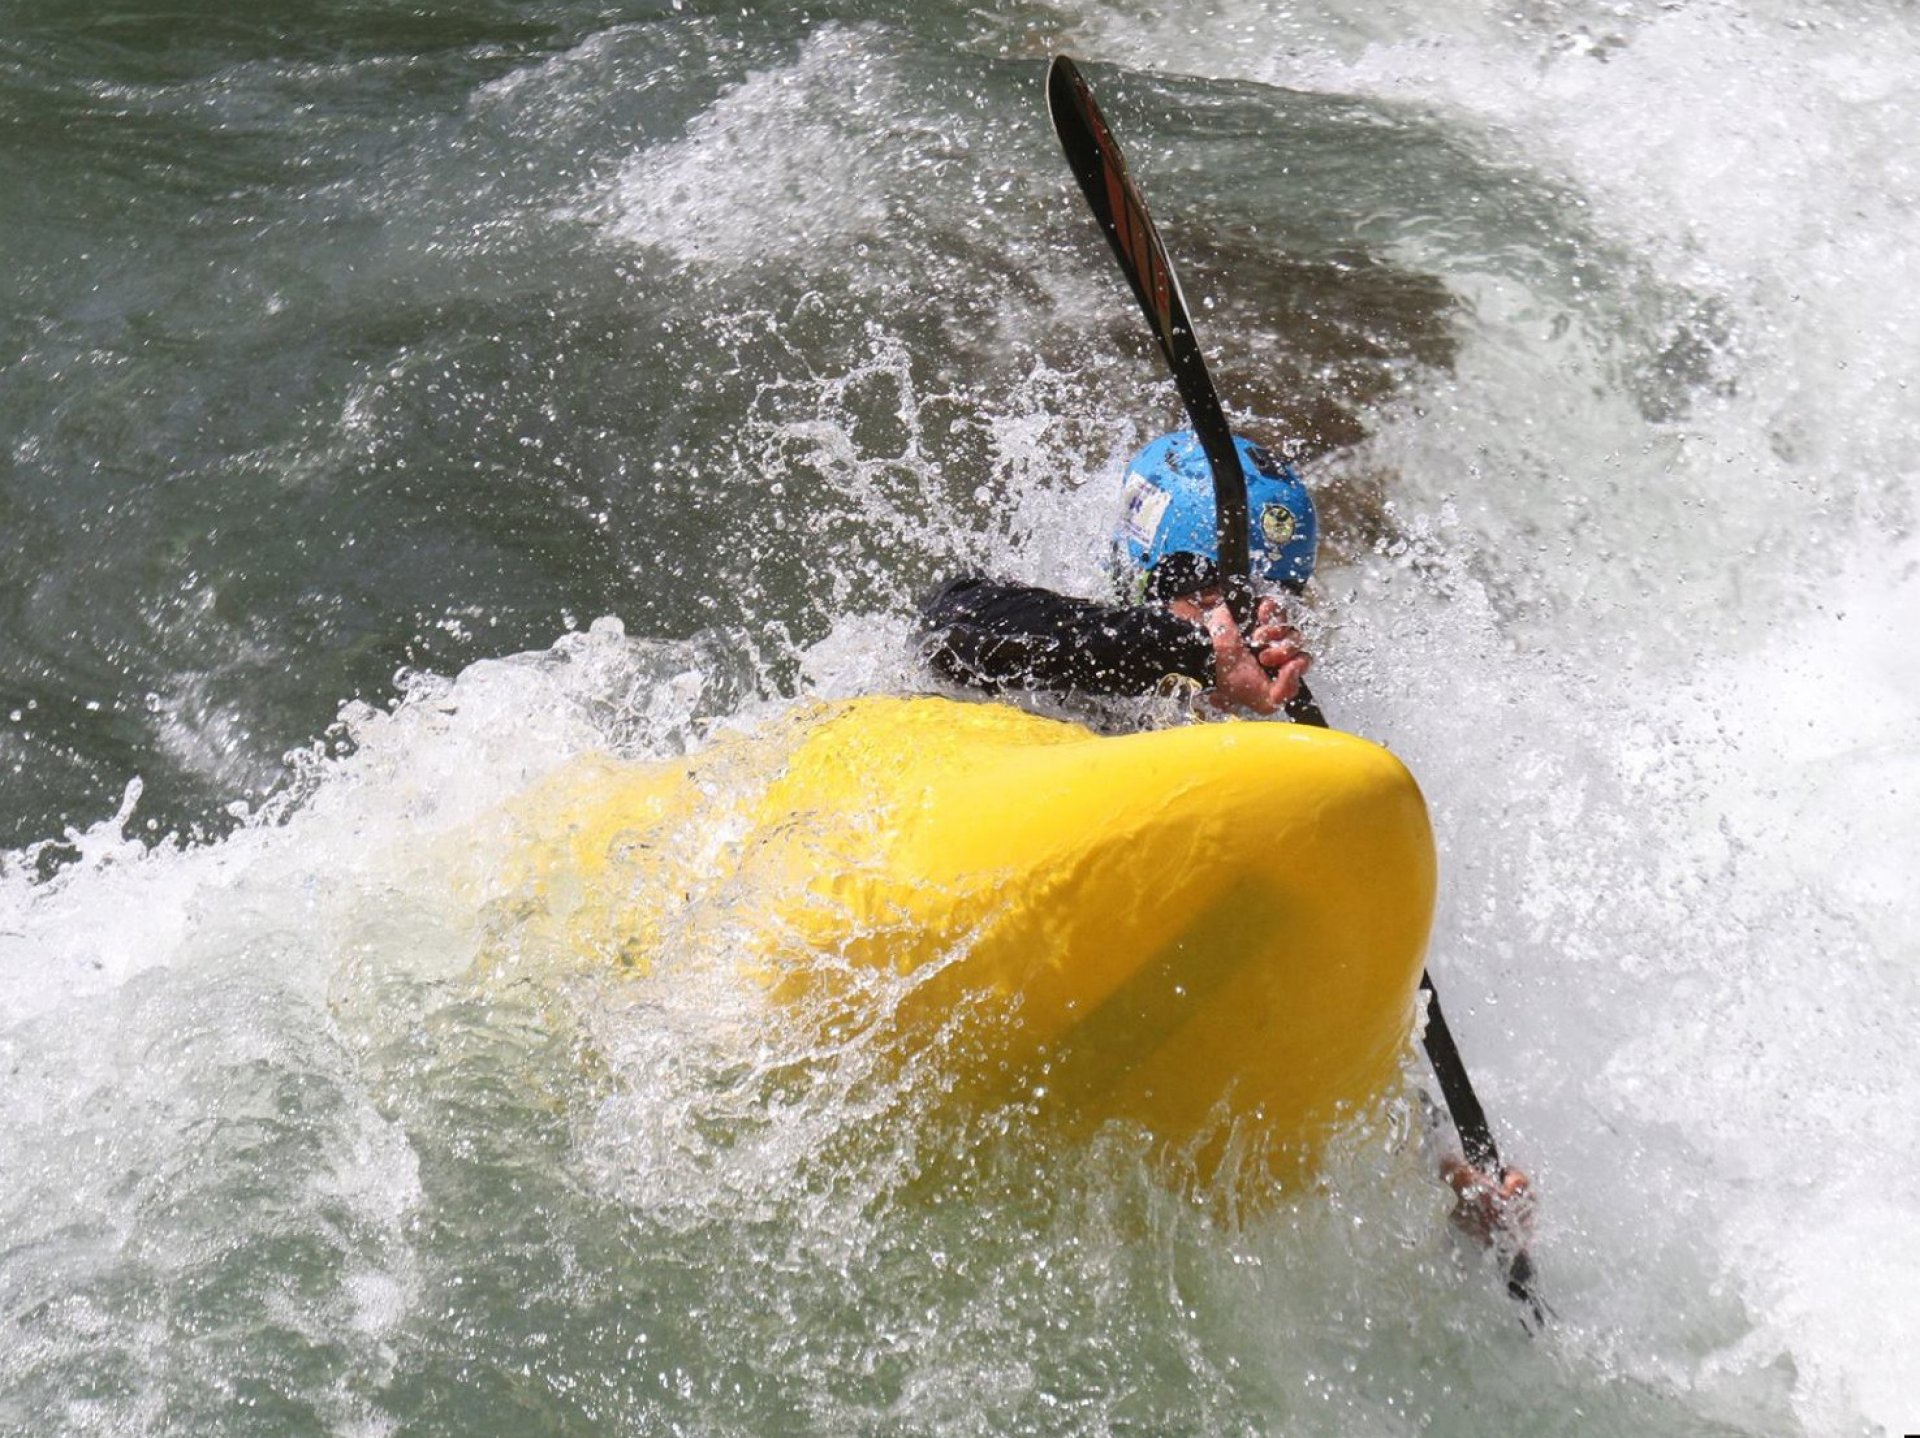 Course for commercial kayak/canoe instructors